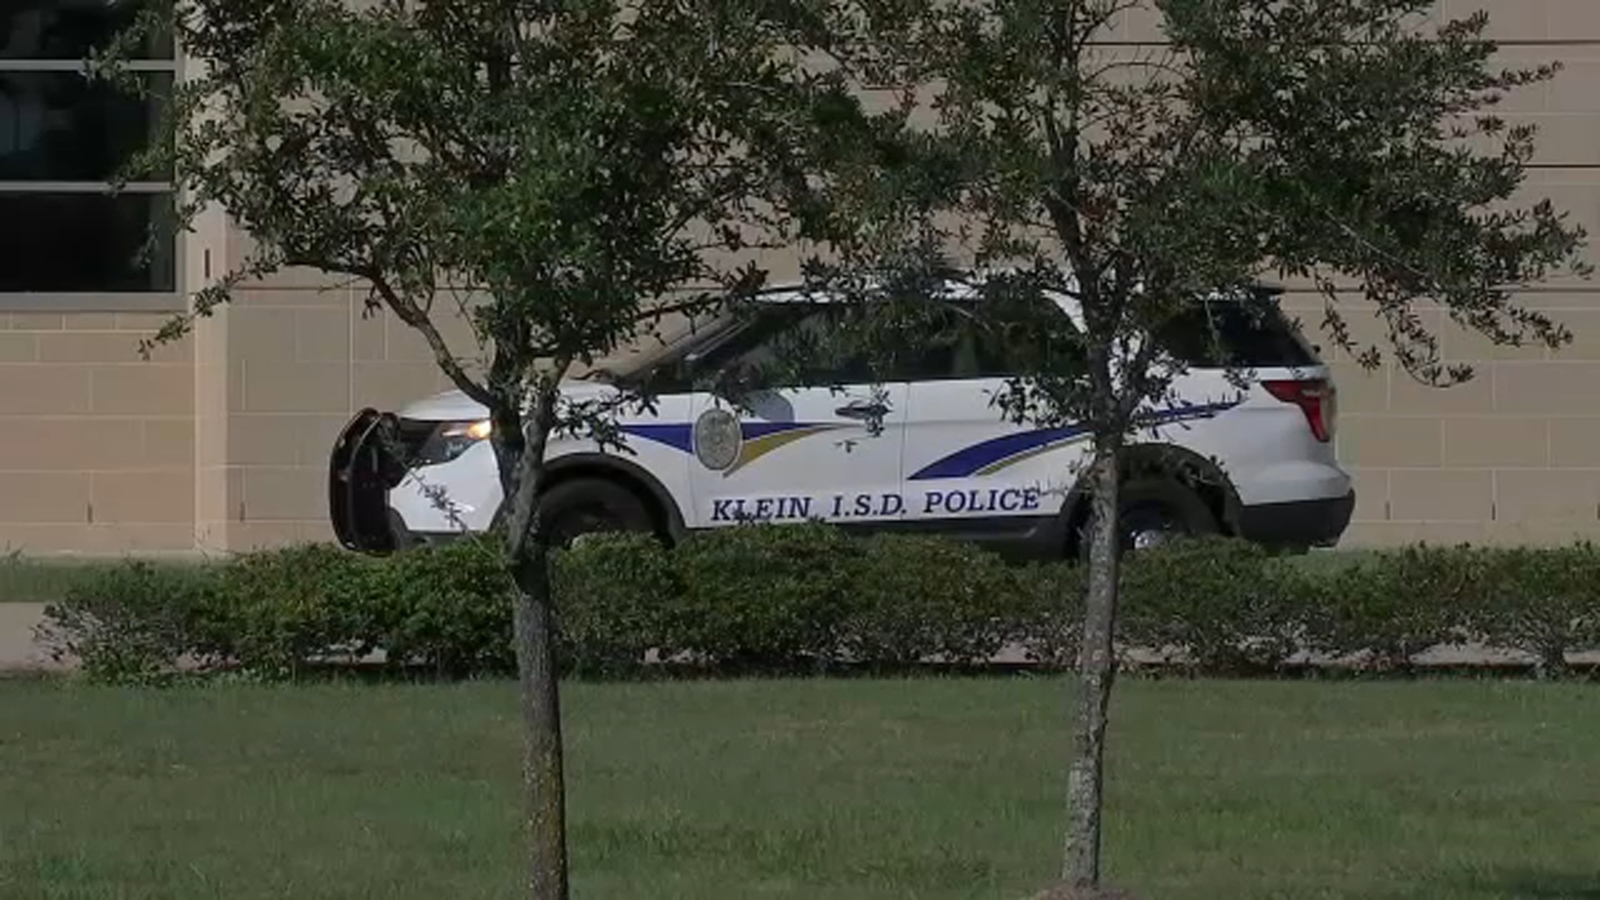 Texas school safety: Klein ISD plans to re-examine security protocols after string of teacher arrests [Video]